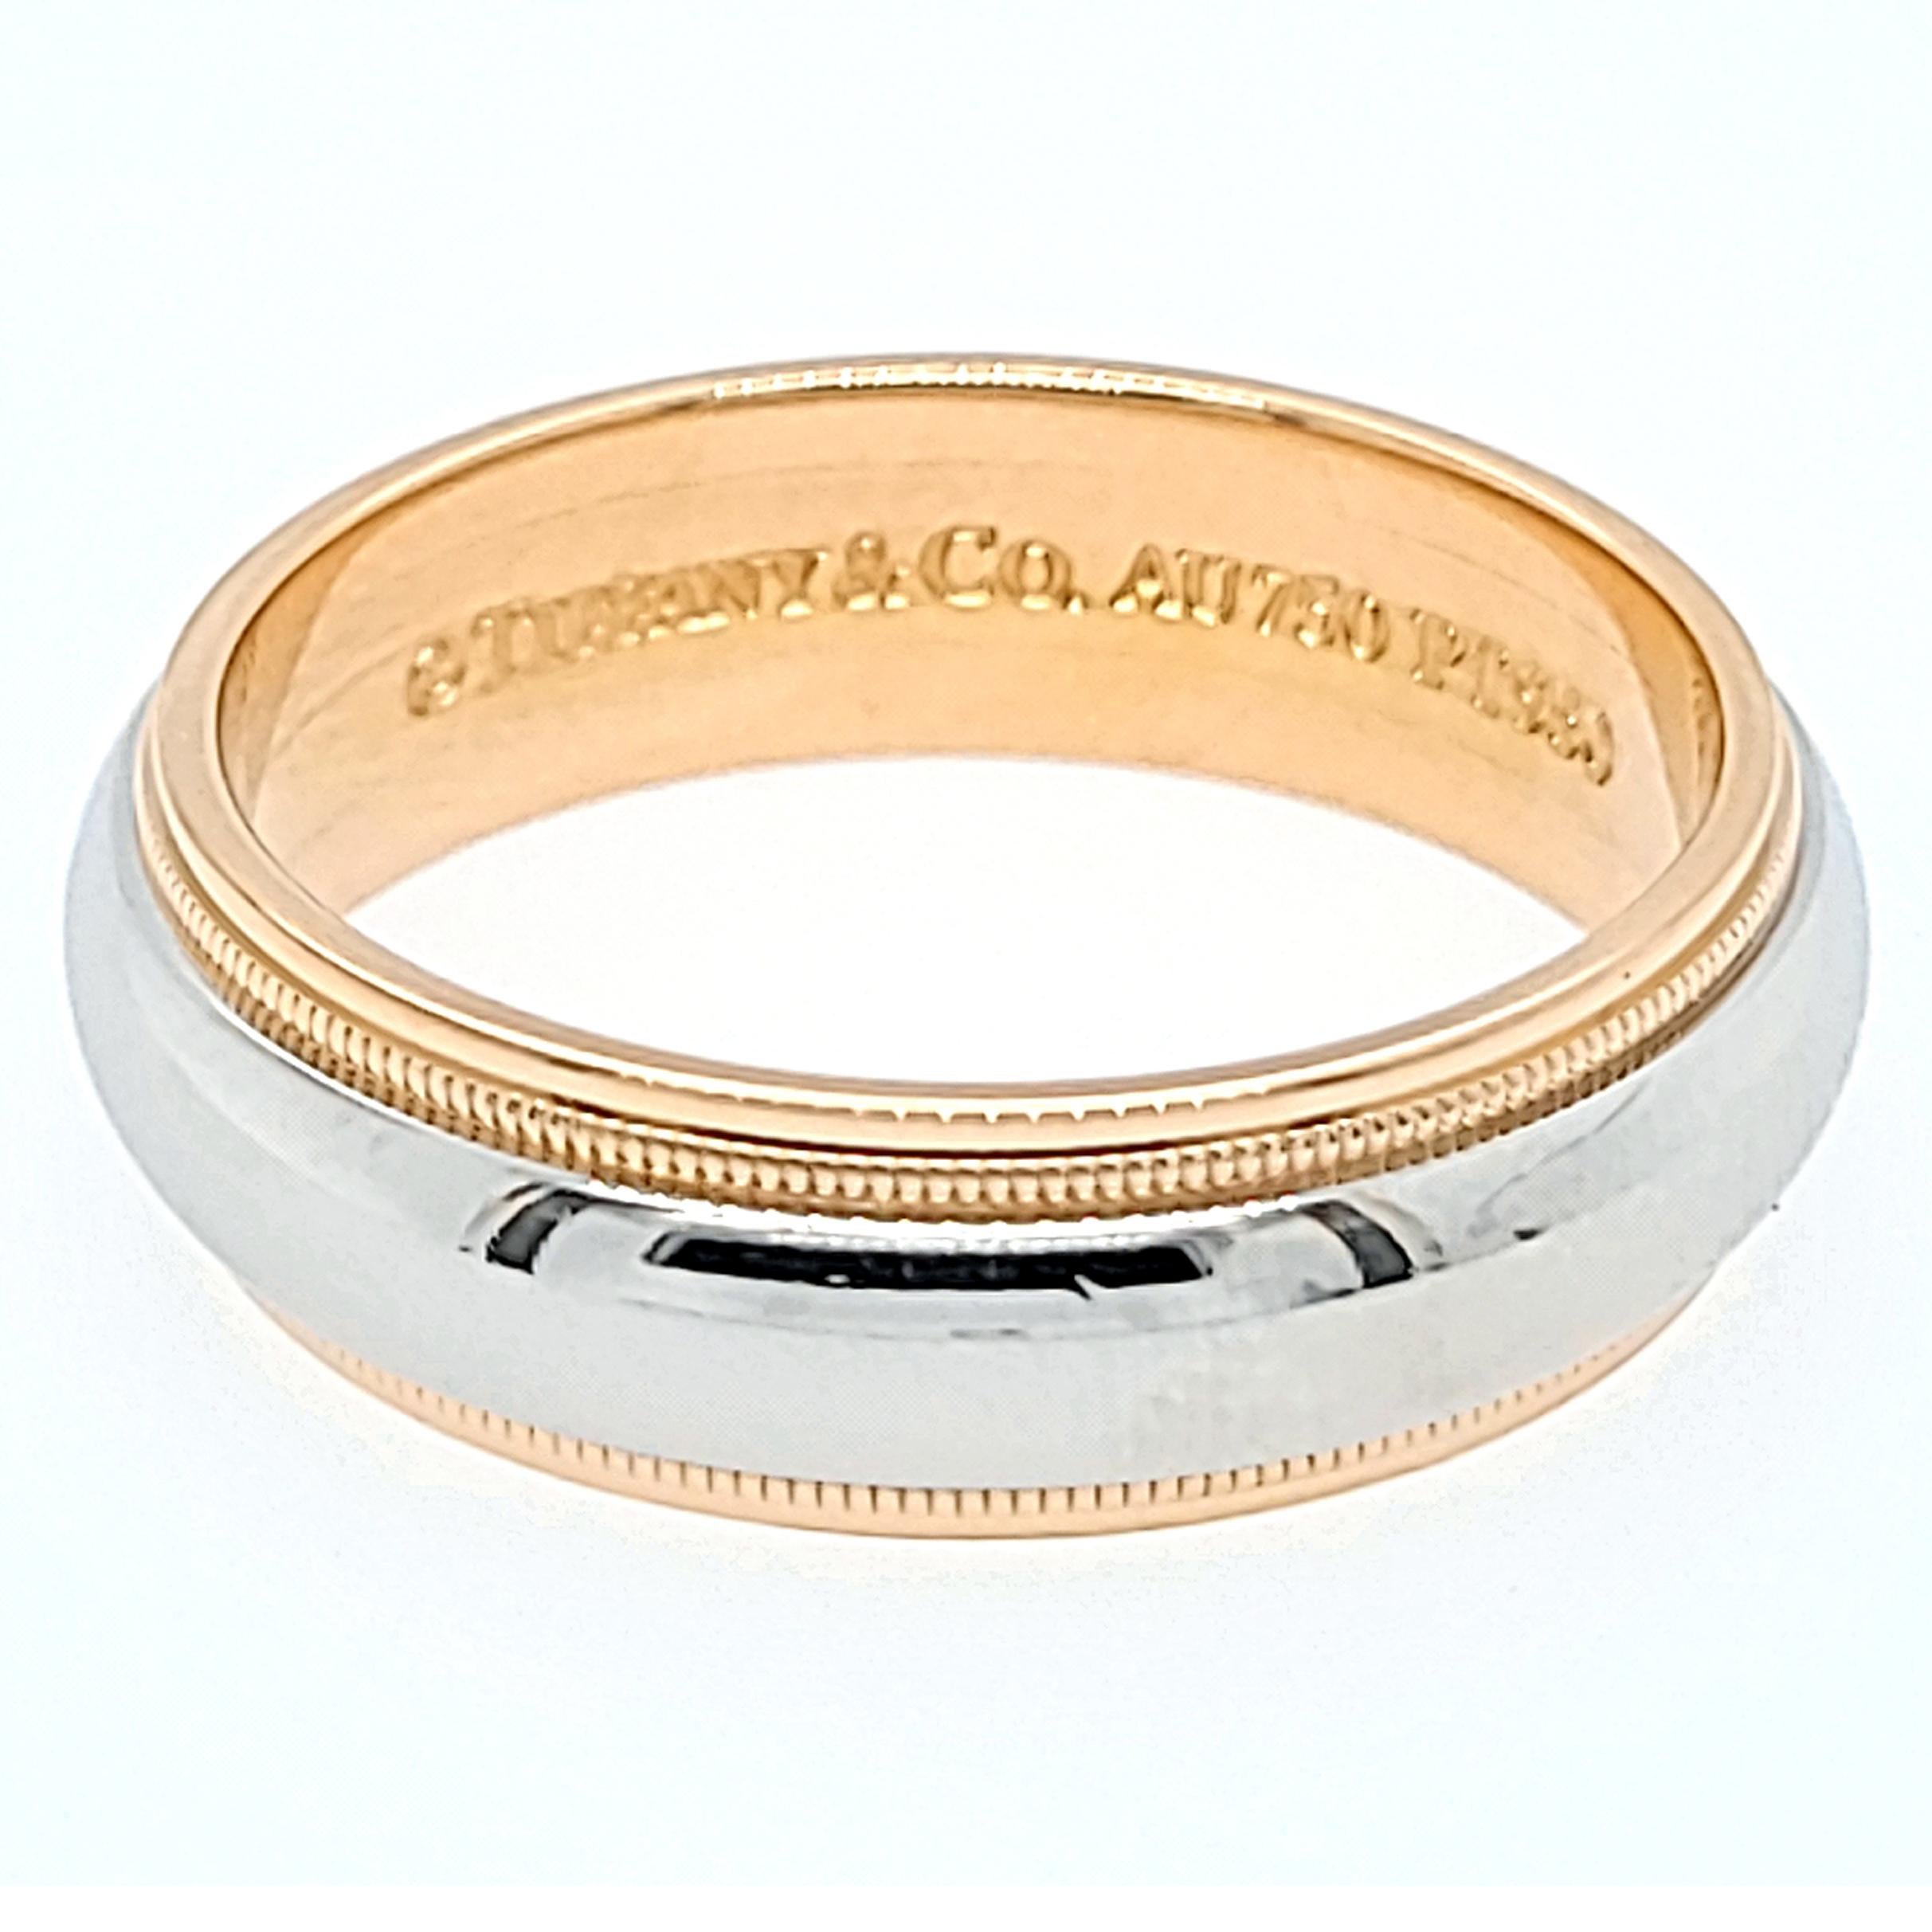 Tiffany and Co Platinum and 18 Karat Rose Gold 6mm Band With Millgrain Detail. Finger Size 9. $2400 MSRP.